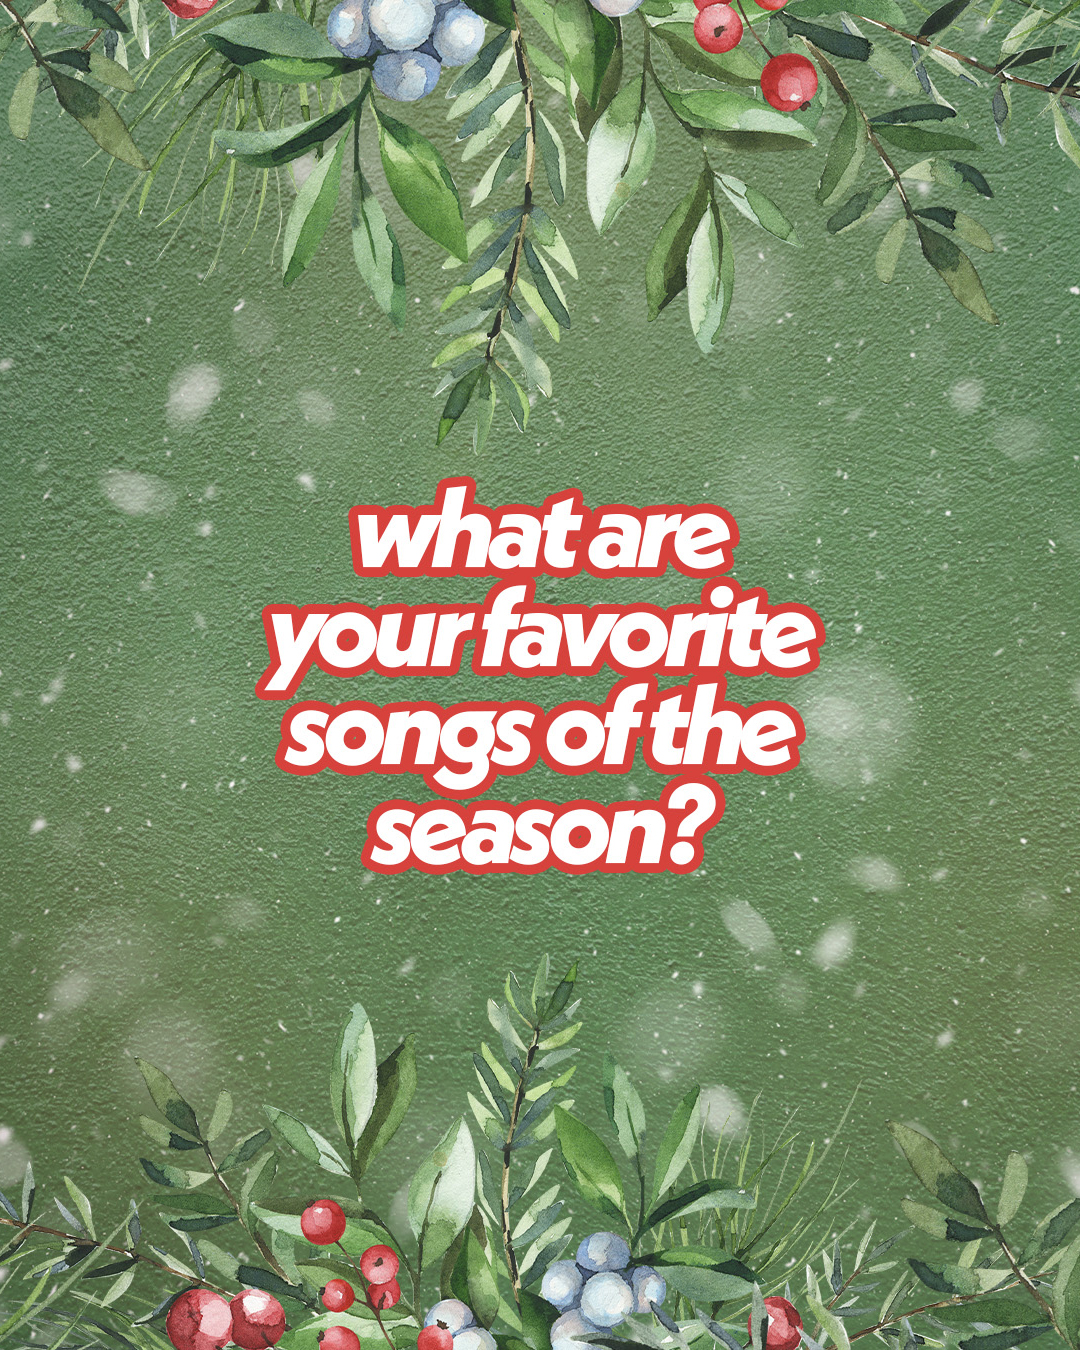 What are your favorite songs of the season?